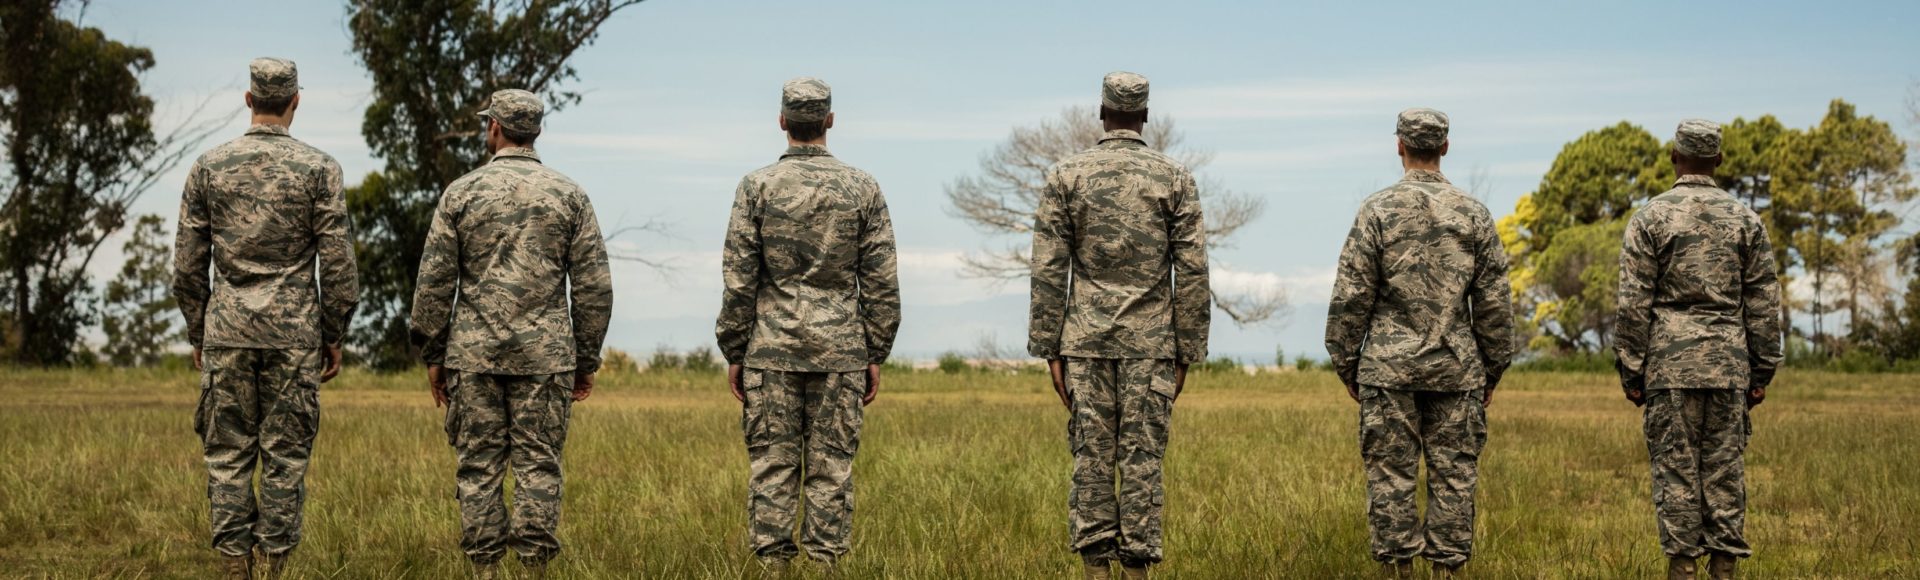 soldiers standing in a field looking away from the camera